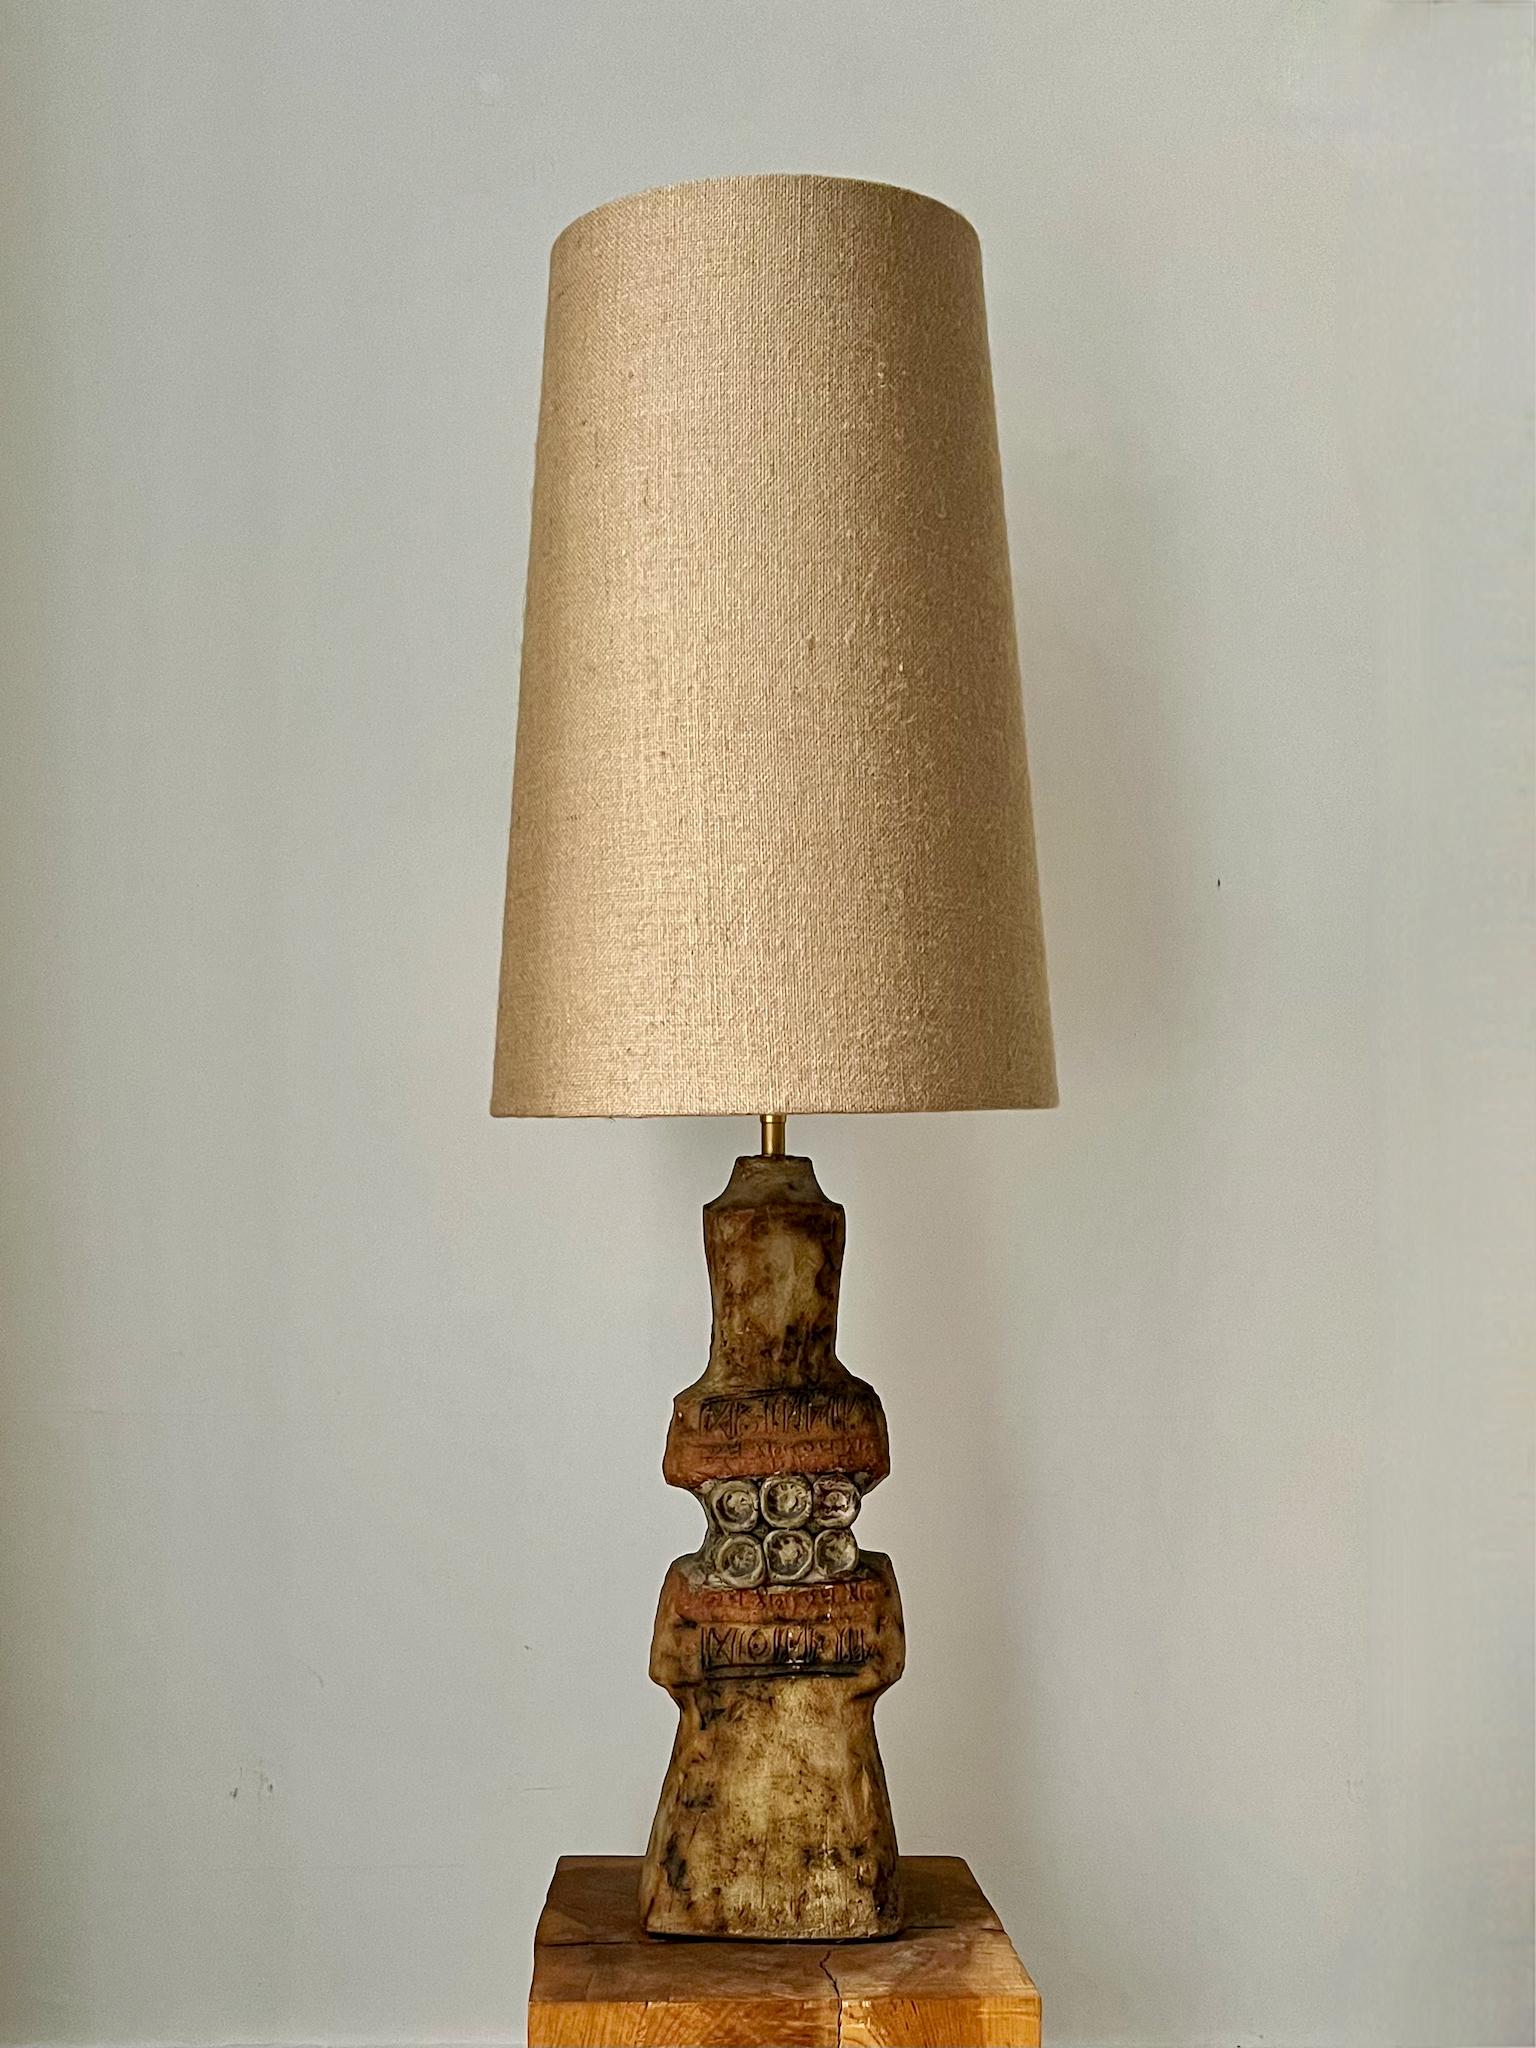 Monumental or oversize studio ceramic table lamp in natural tones by Bernard Rooke, England mid-20th century.

A beautiful statement piece, hand-built, with organic shaping in natural tones of sand and stone. The weight of the piece suggests Rooke's